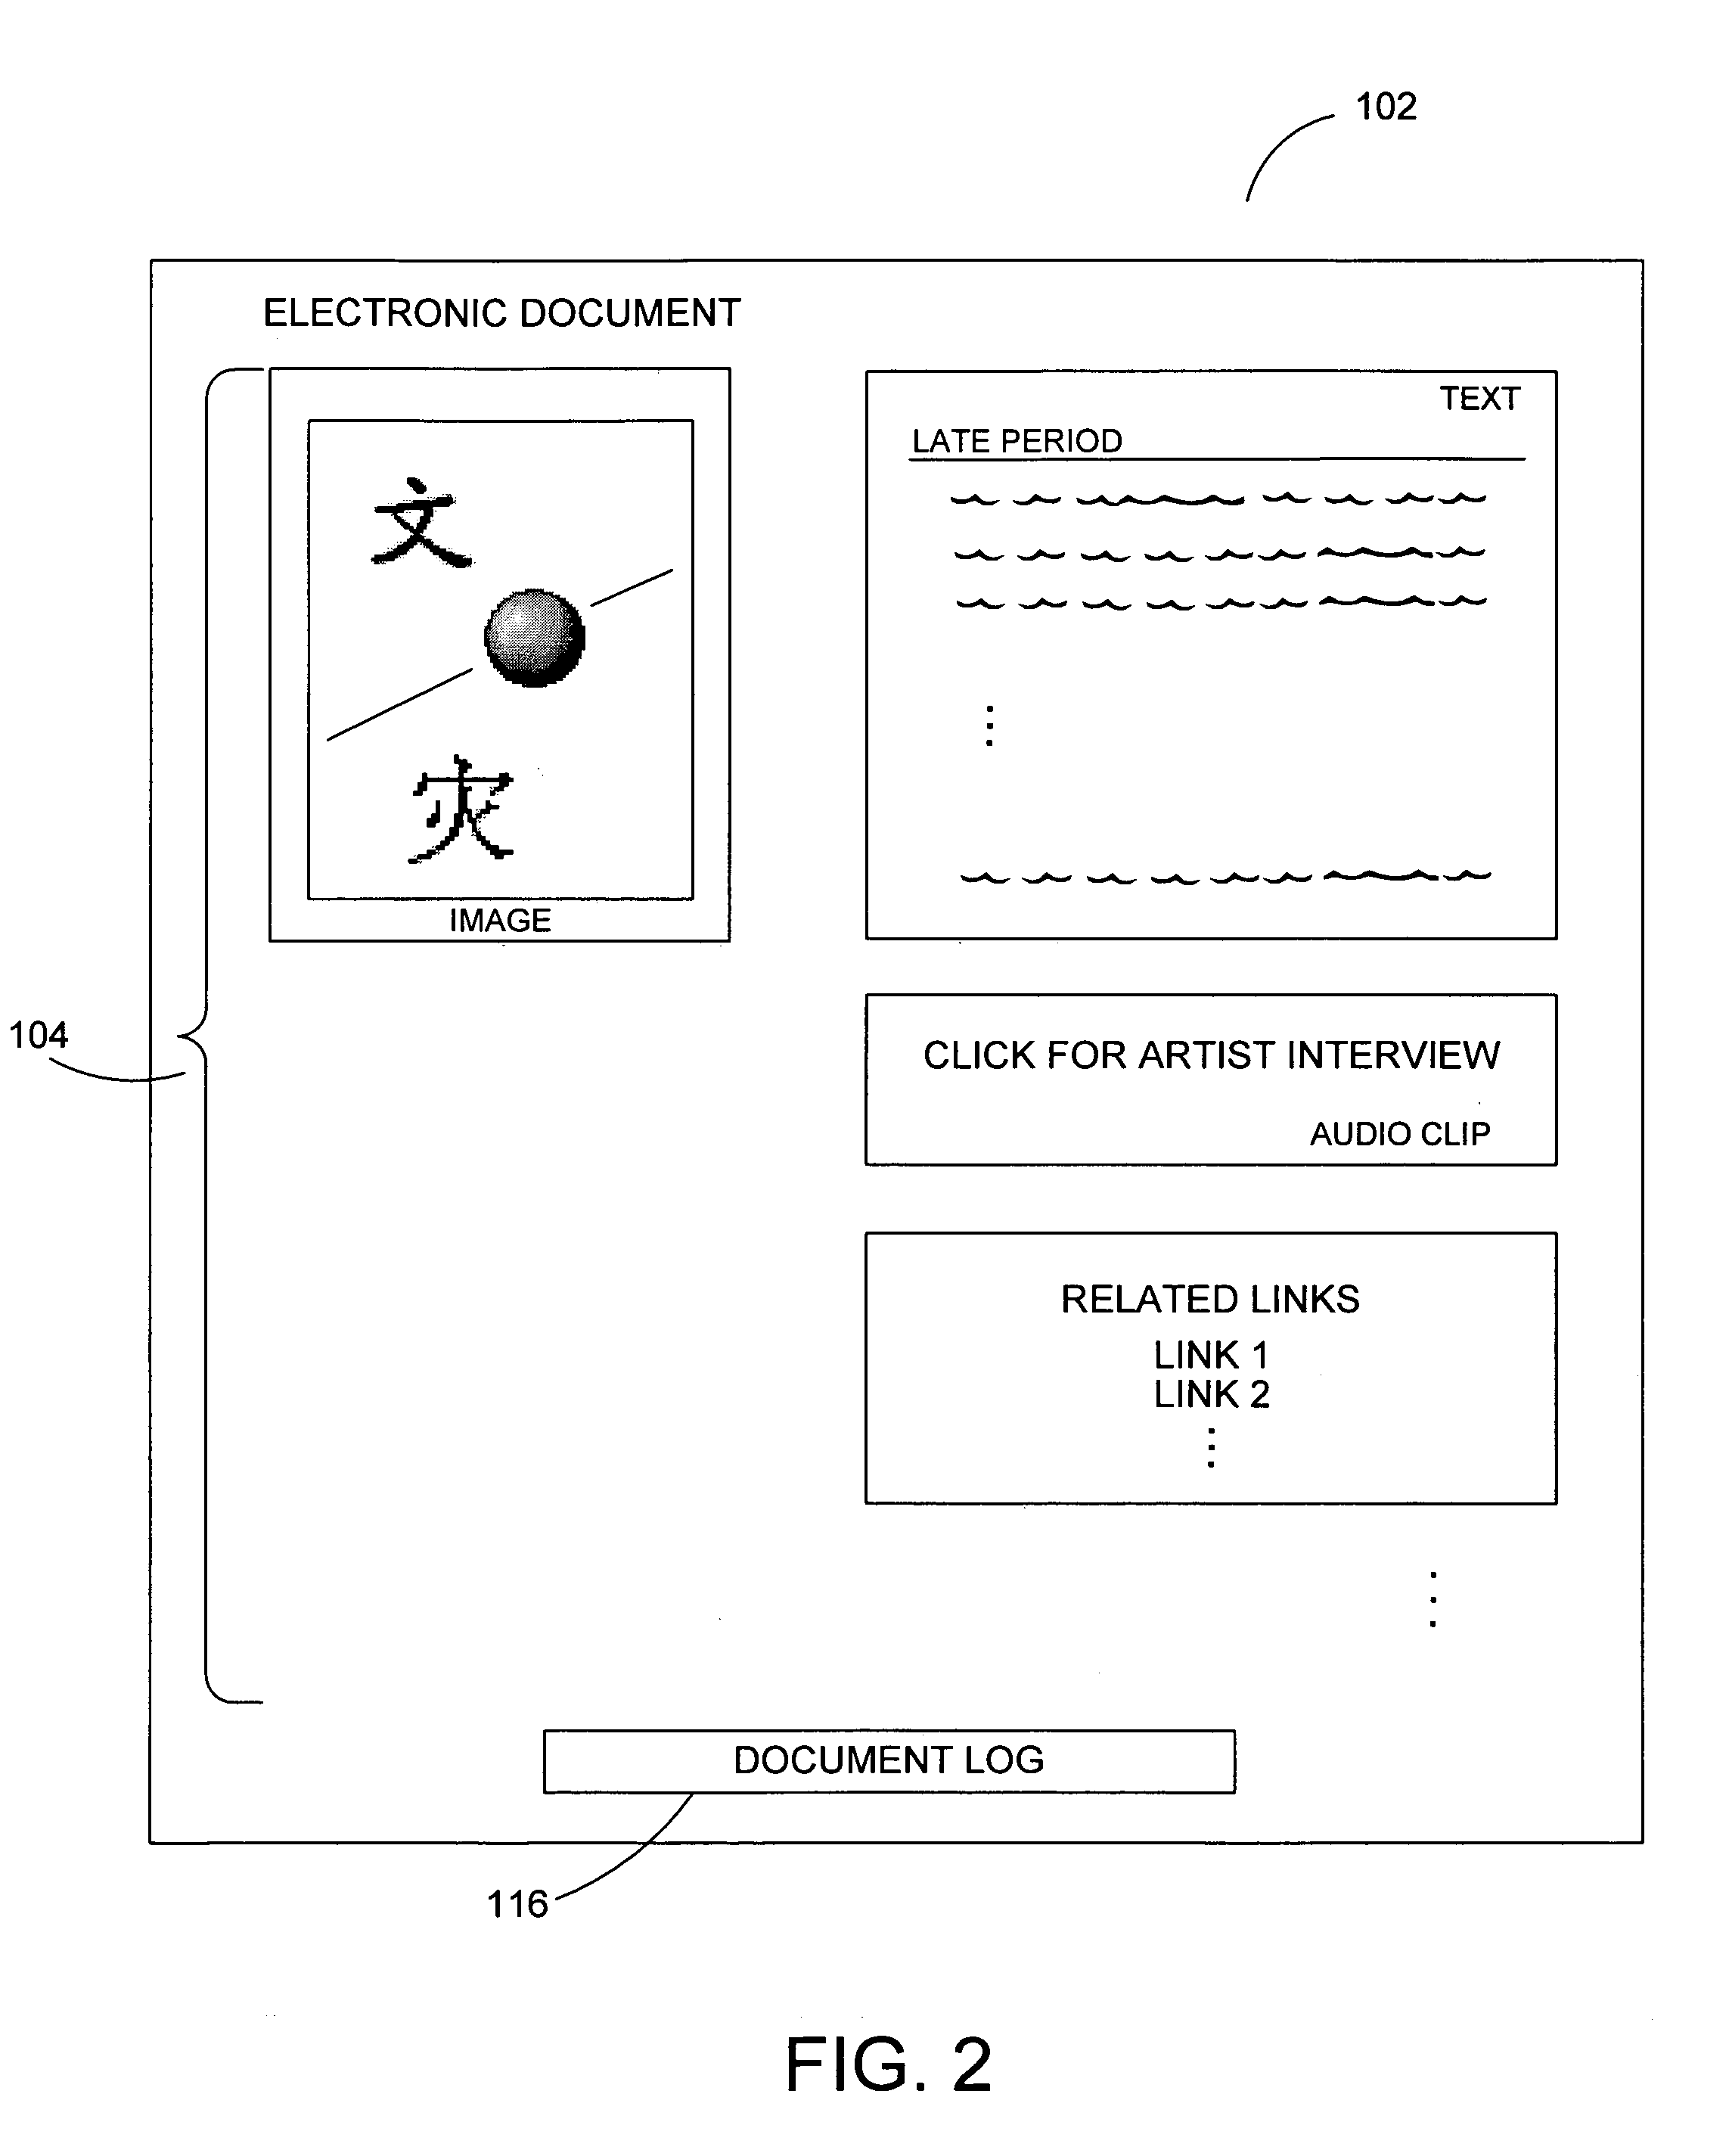 System and method for management of a componentized electronic document retrievable over a network